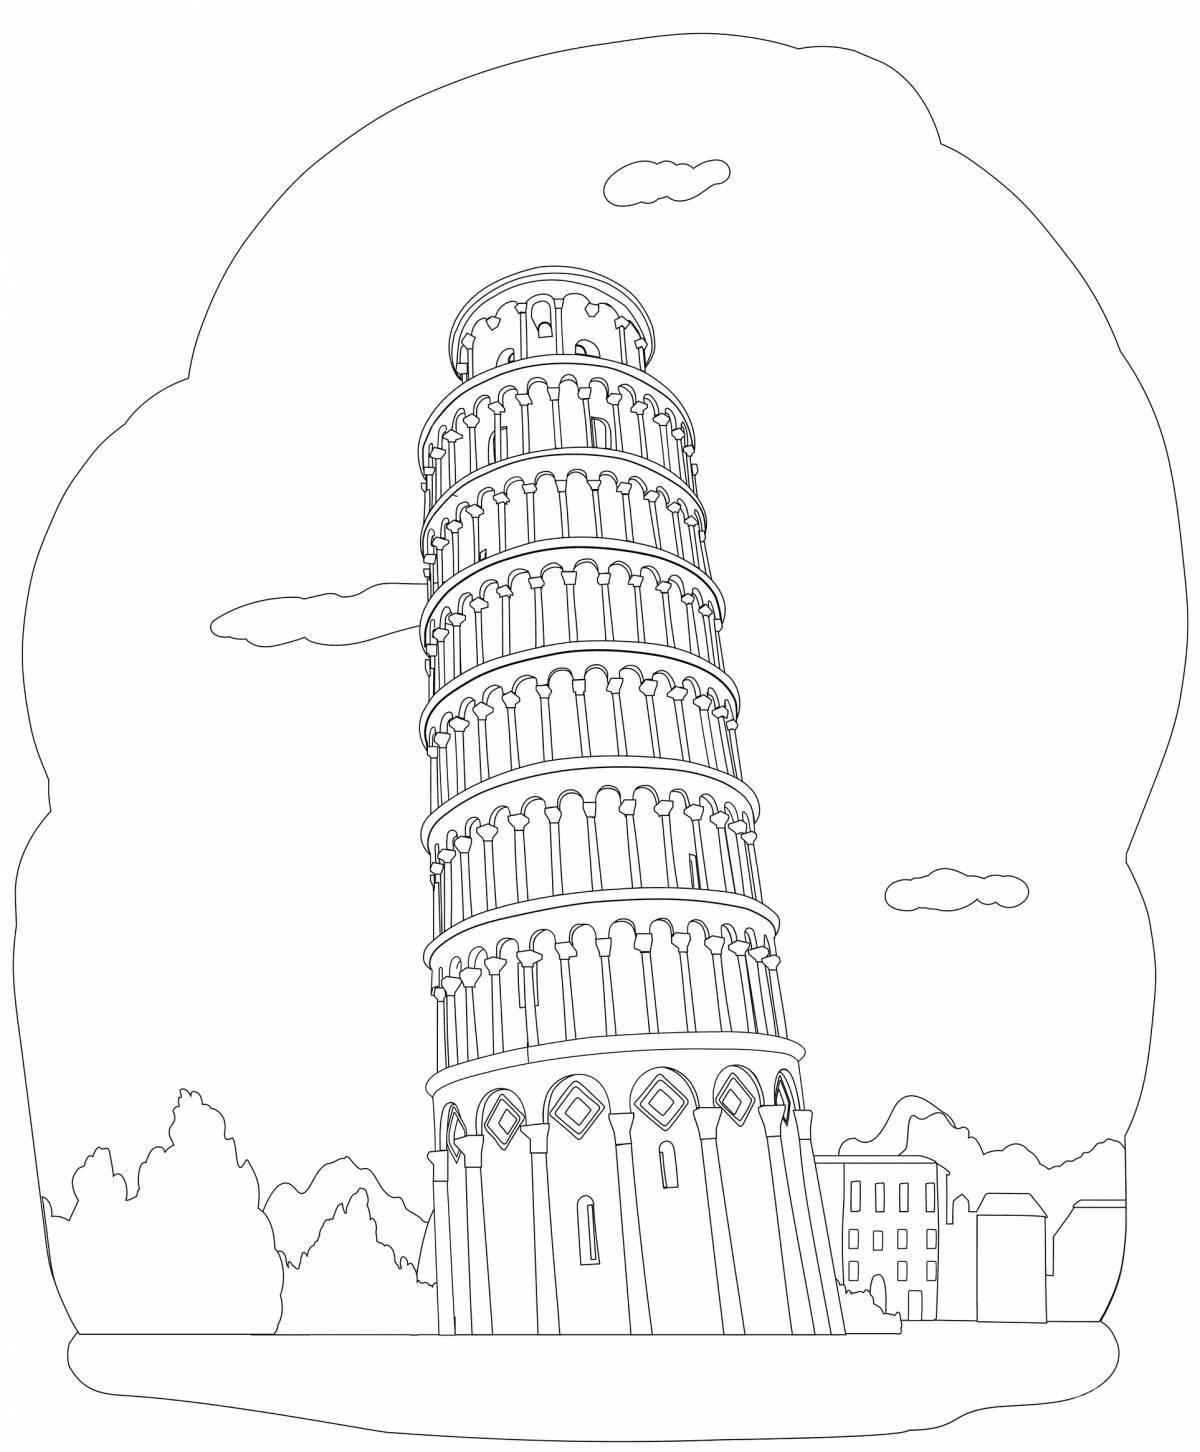 Great coloring of the Leaning Tower of Pisa